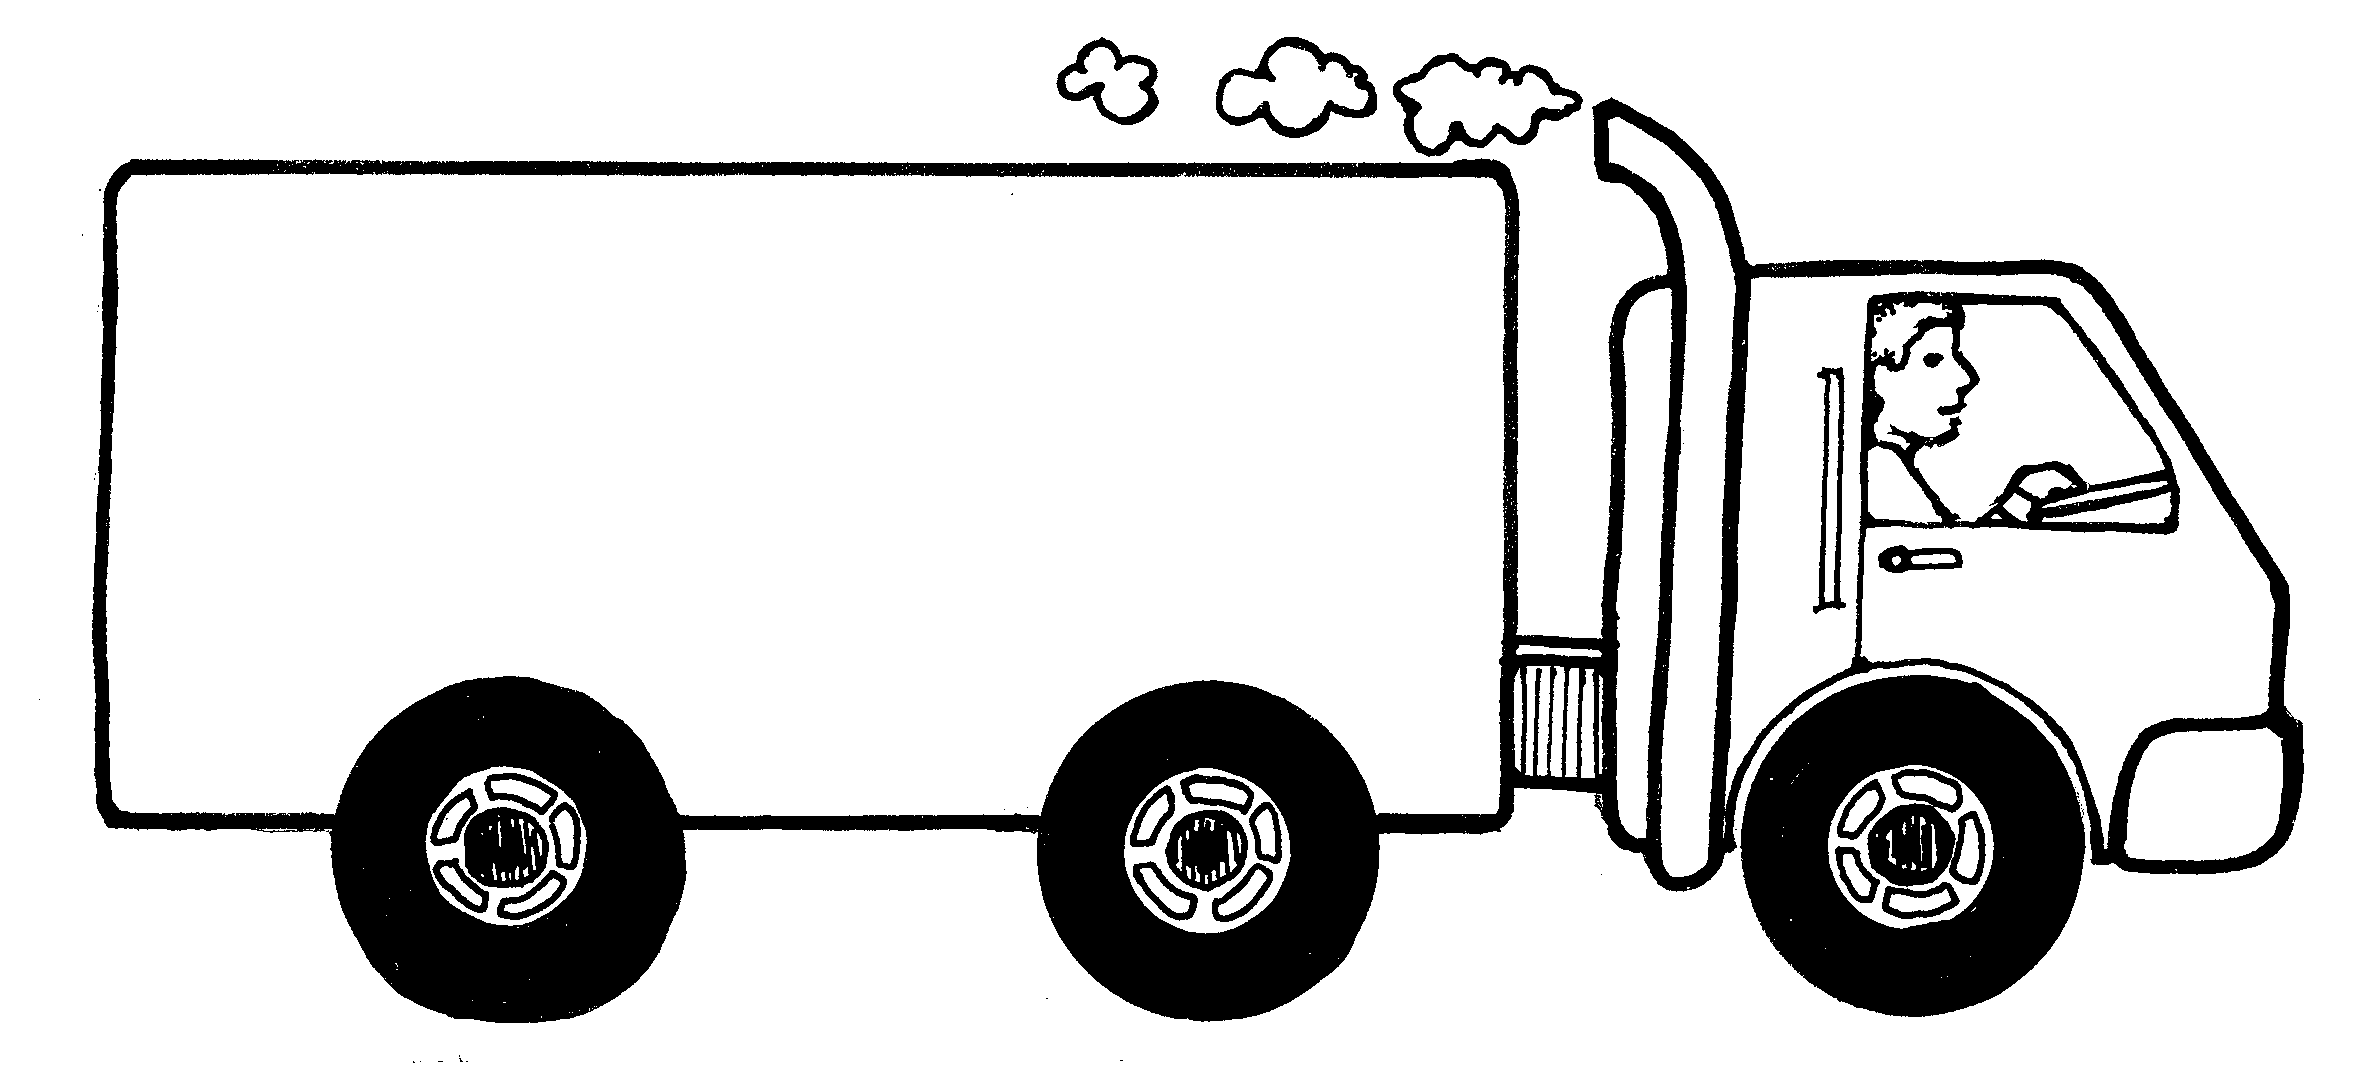 Free Transport Truck Cliparts, Download Free Clip Art, Free